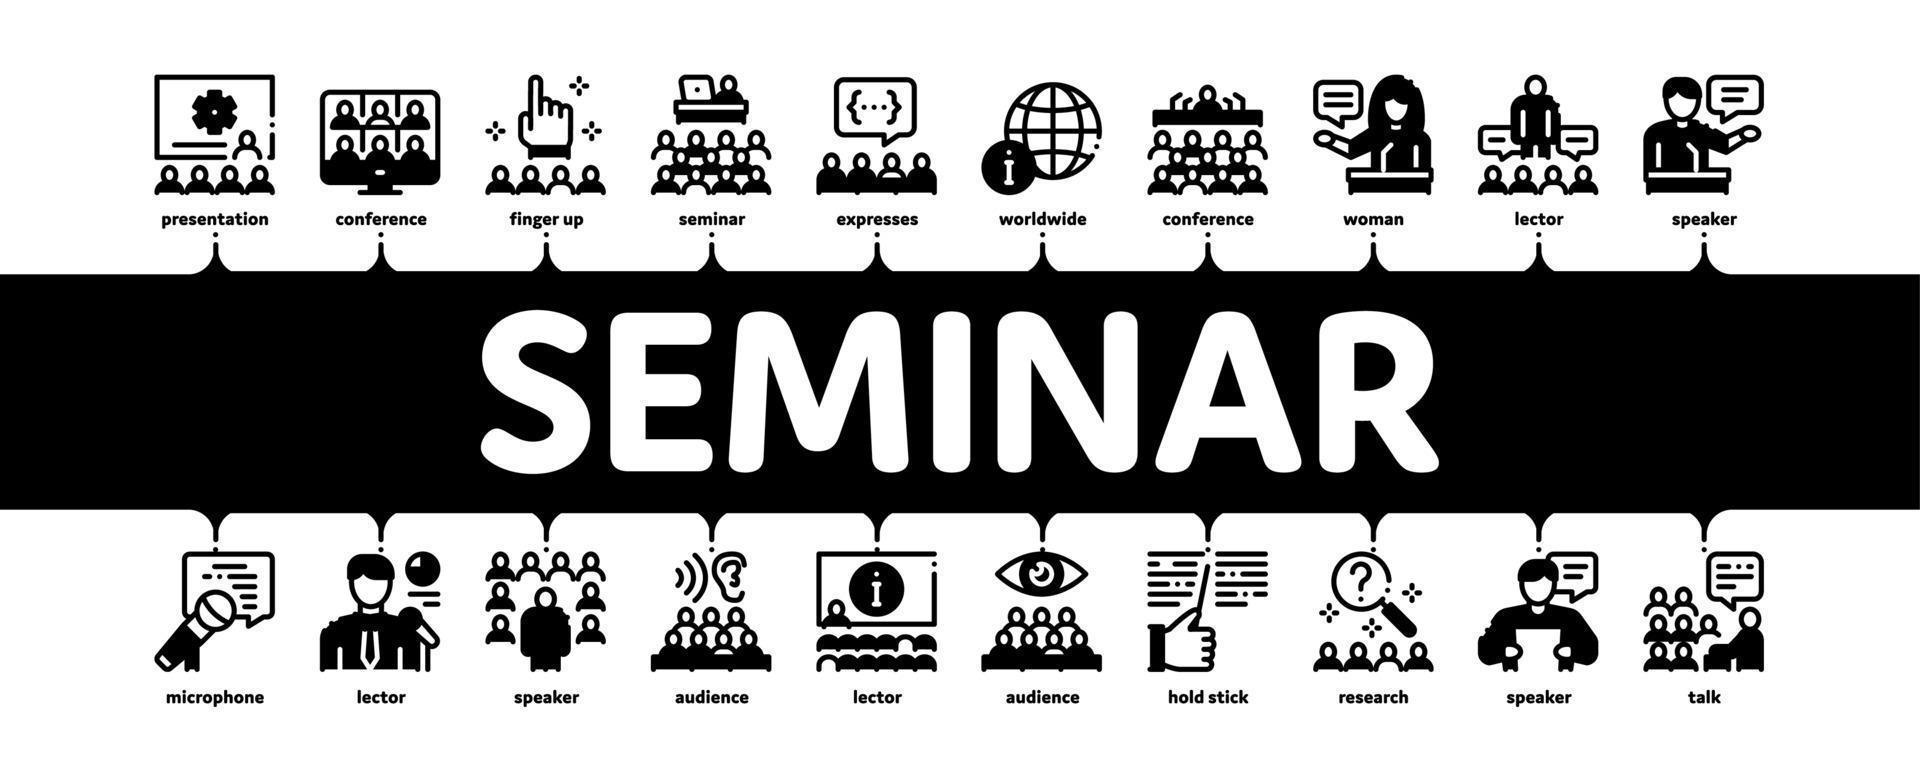 Seminar Conference Minimal Infographic Banner Vector